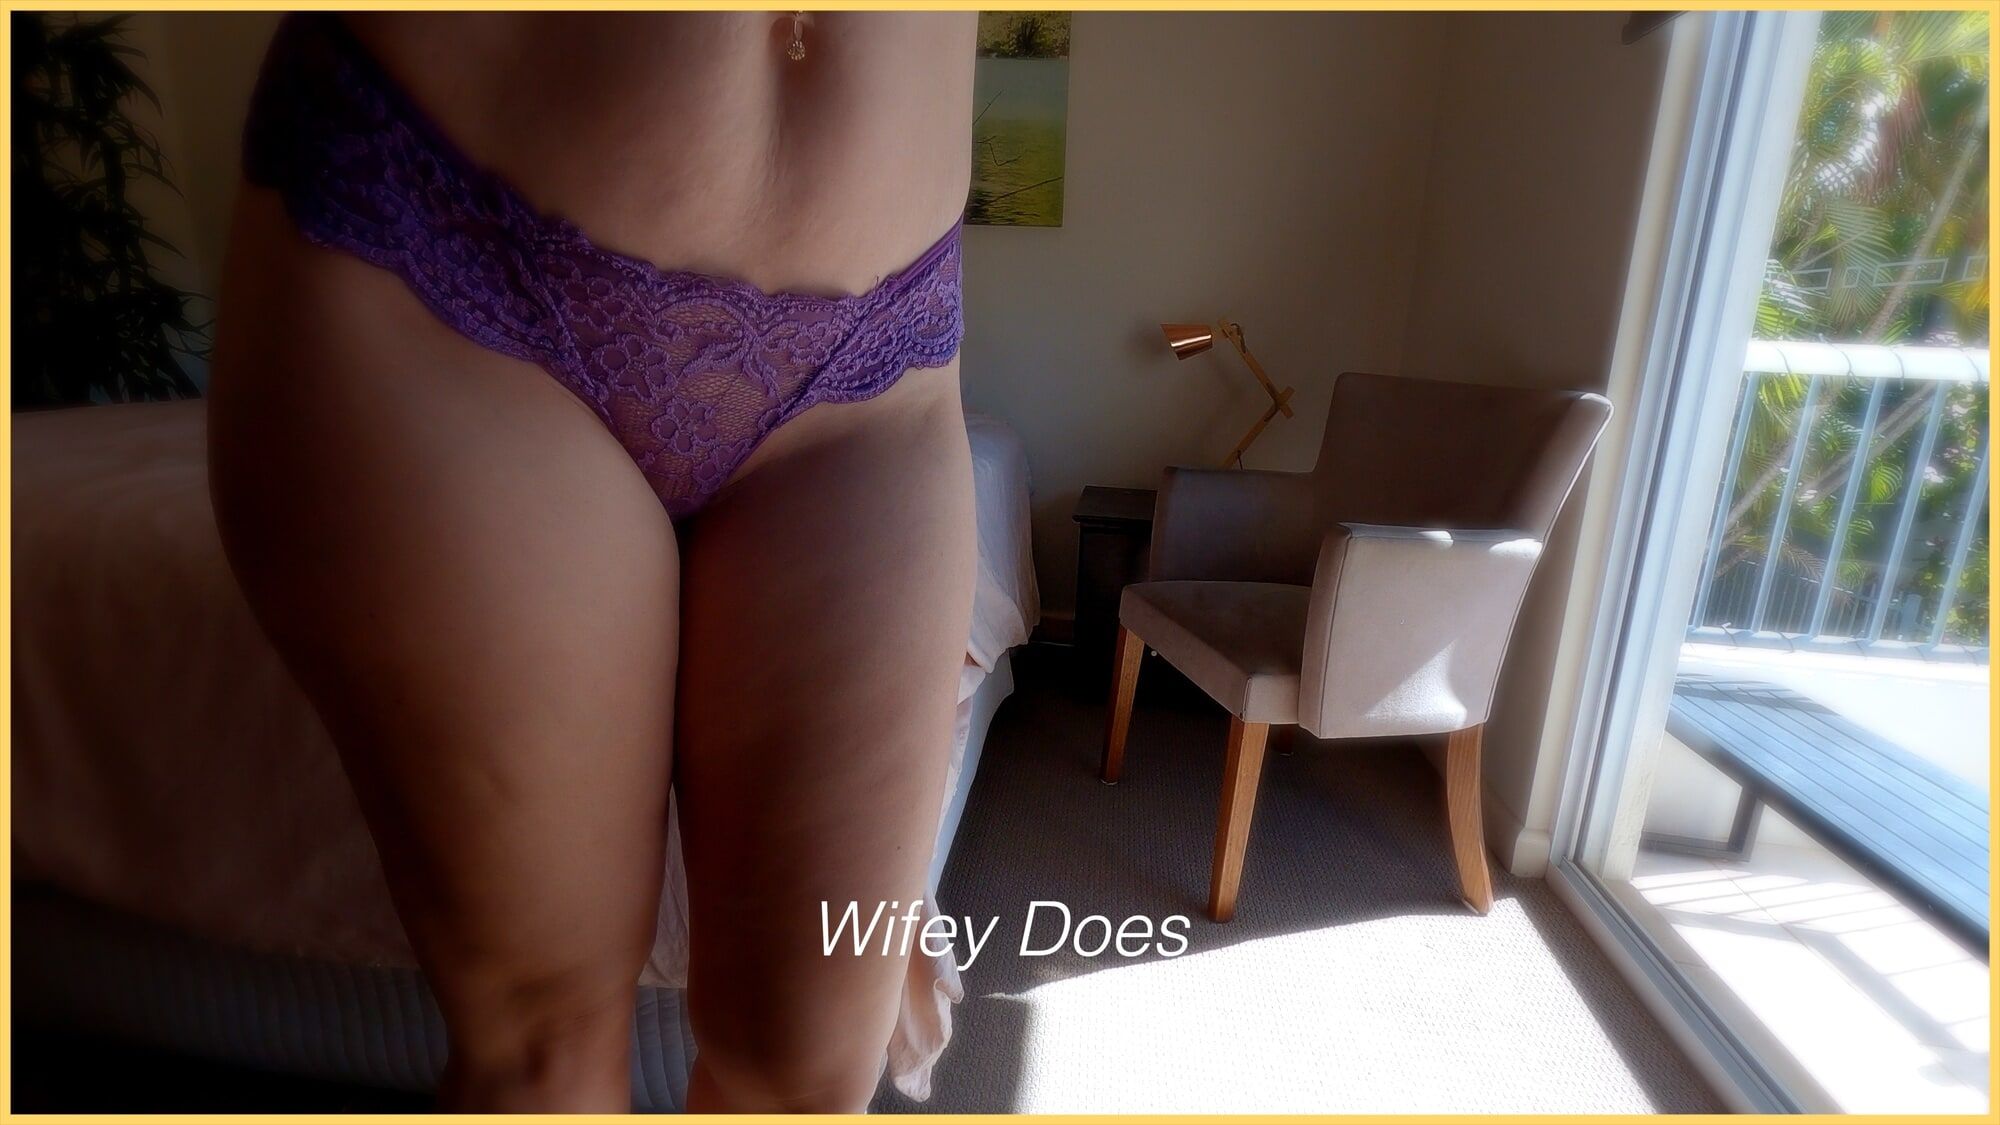 Wifey tries on different panties for your enjoyment